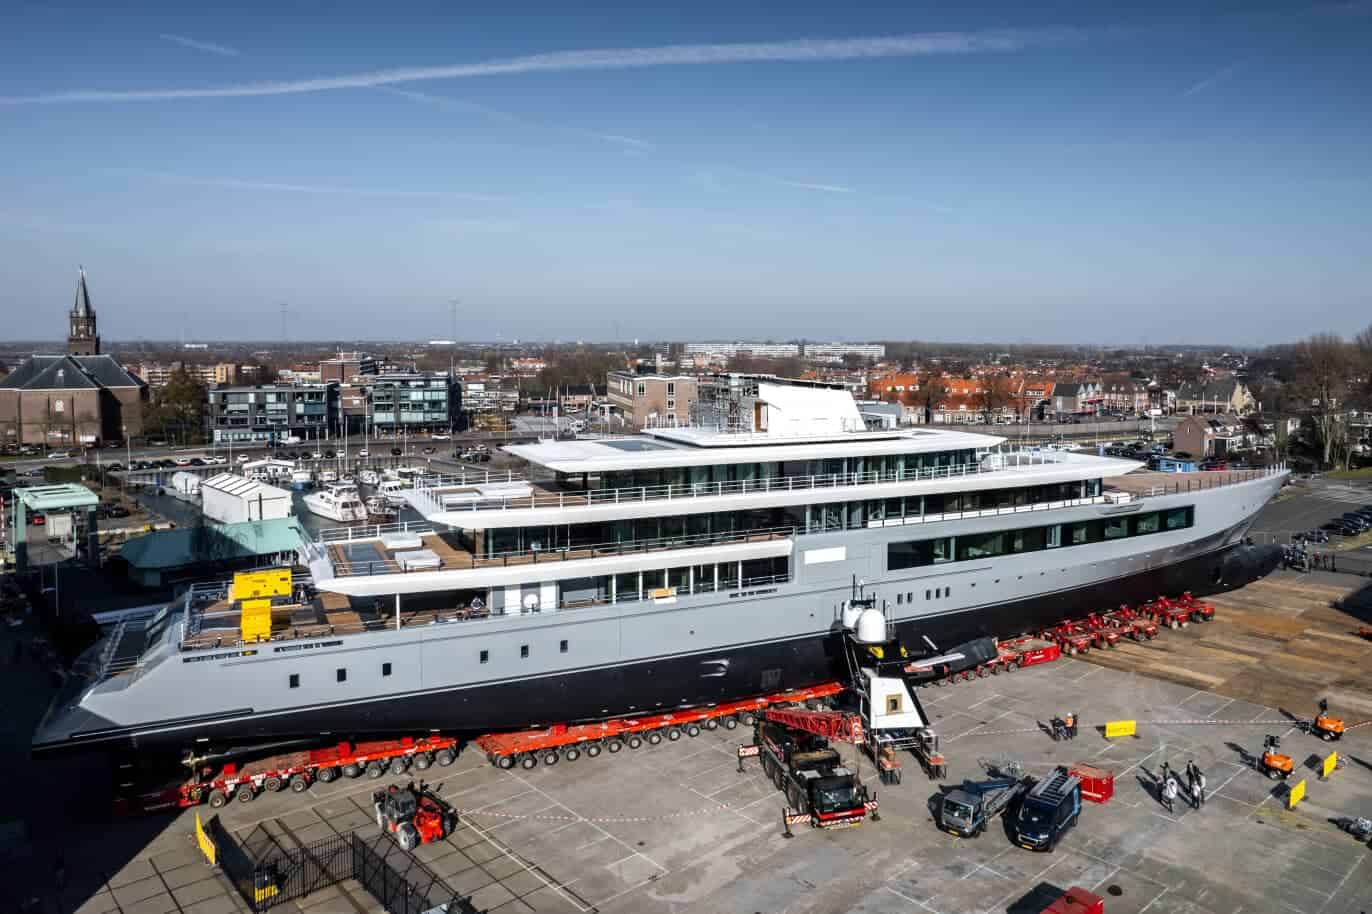 Spielberg Yacht, Seven Seas, in the Netherlands by Superyacht.com